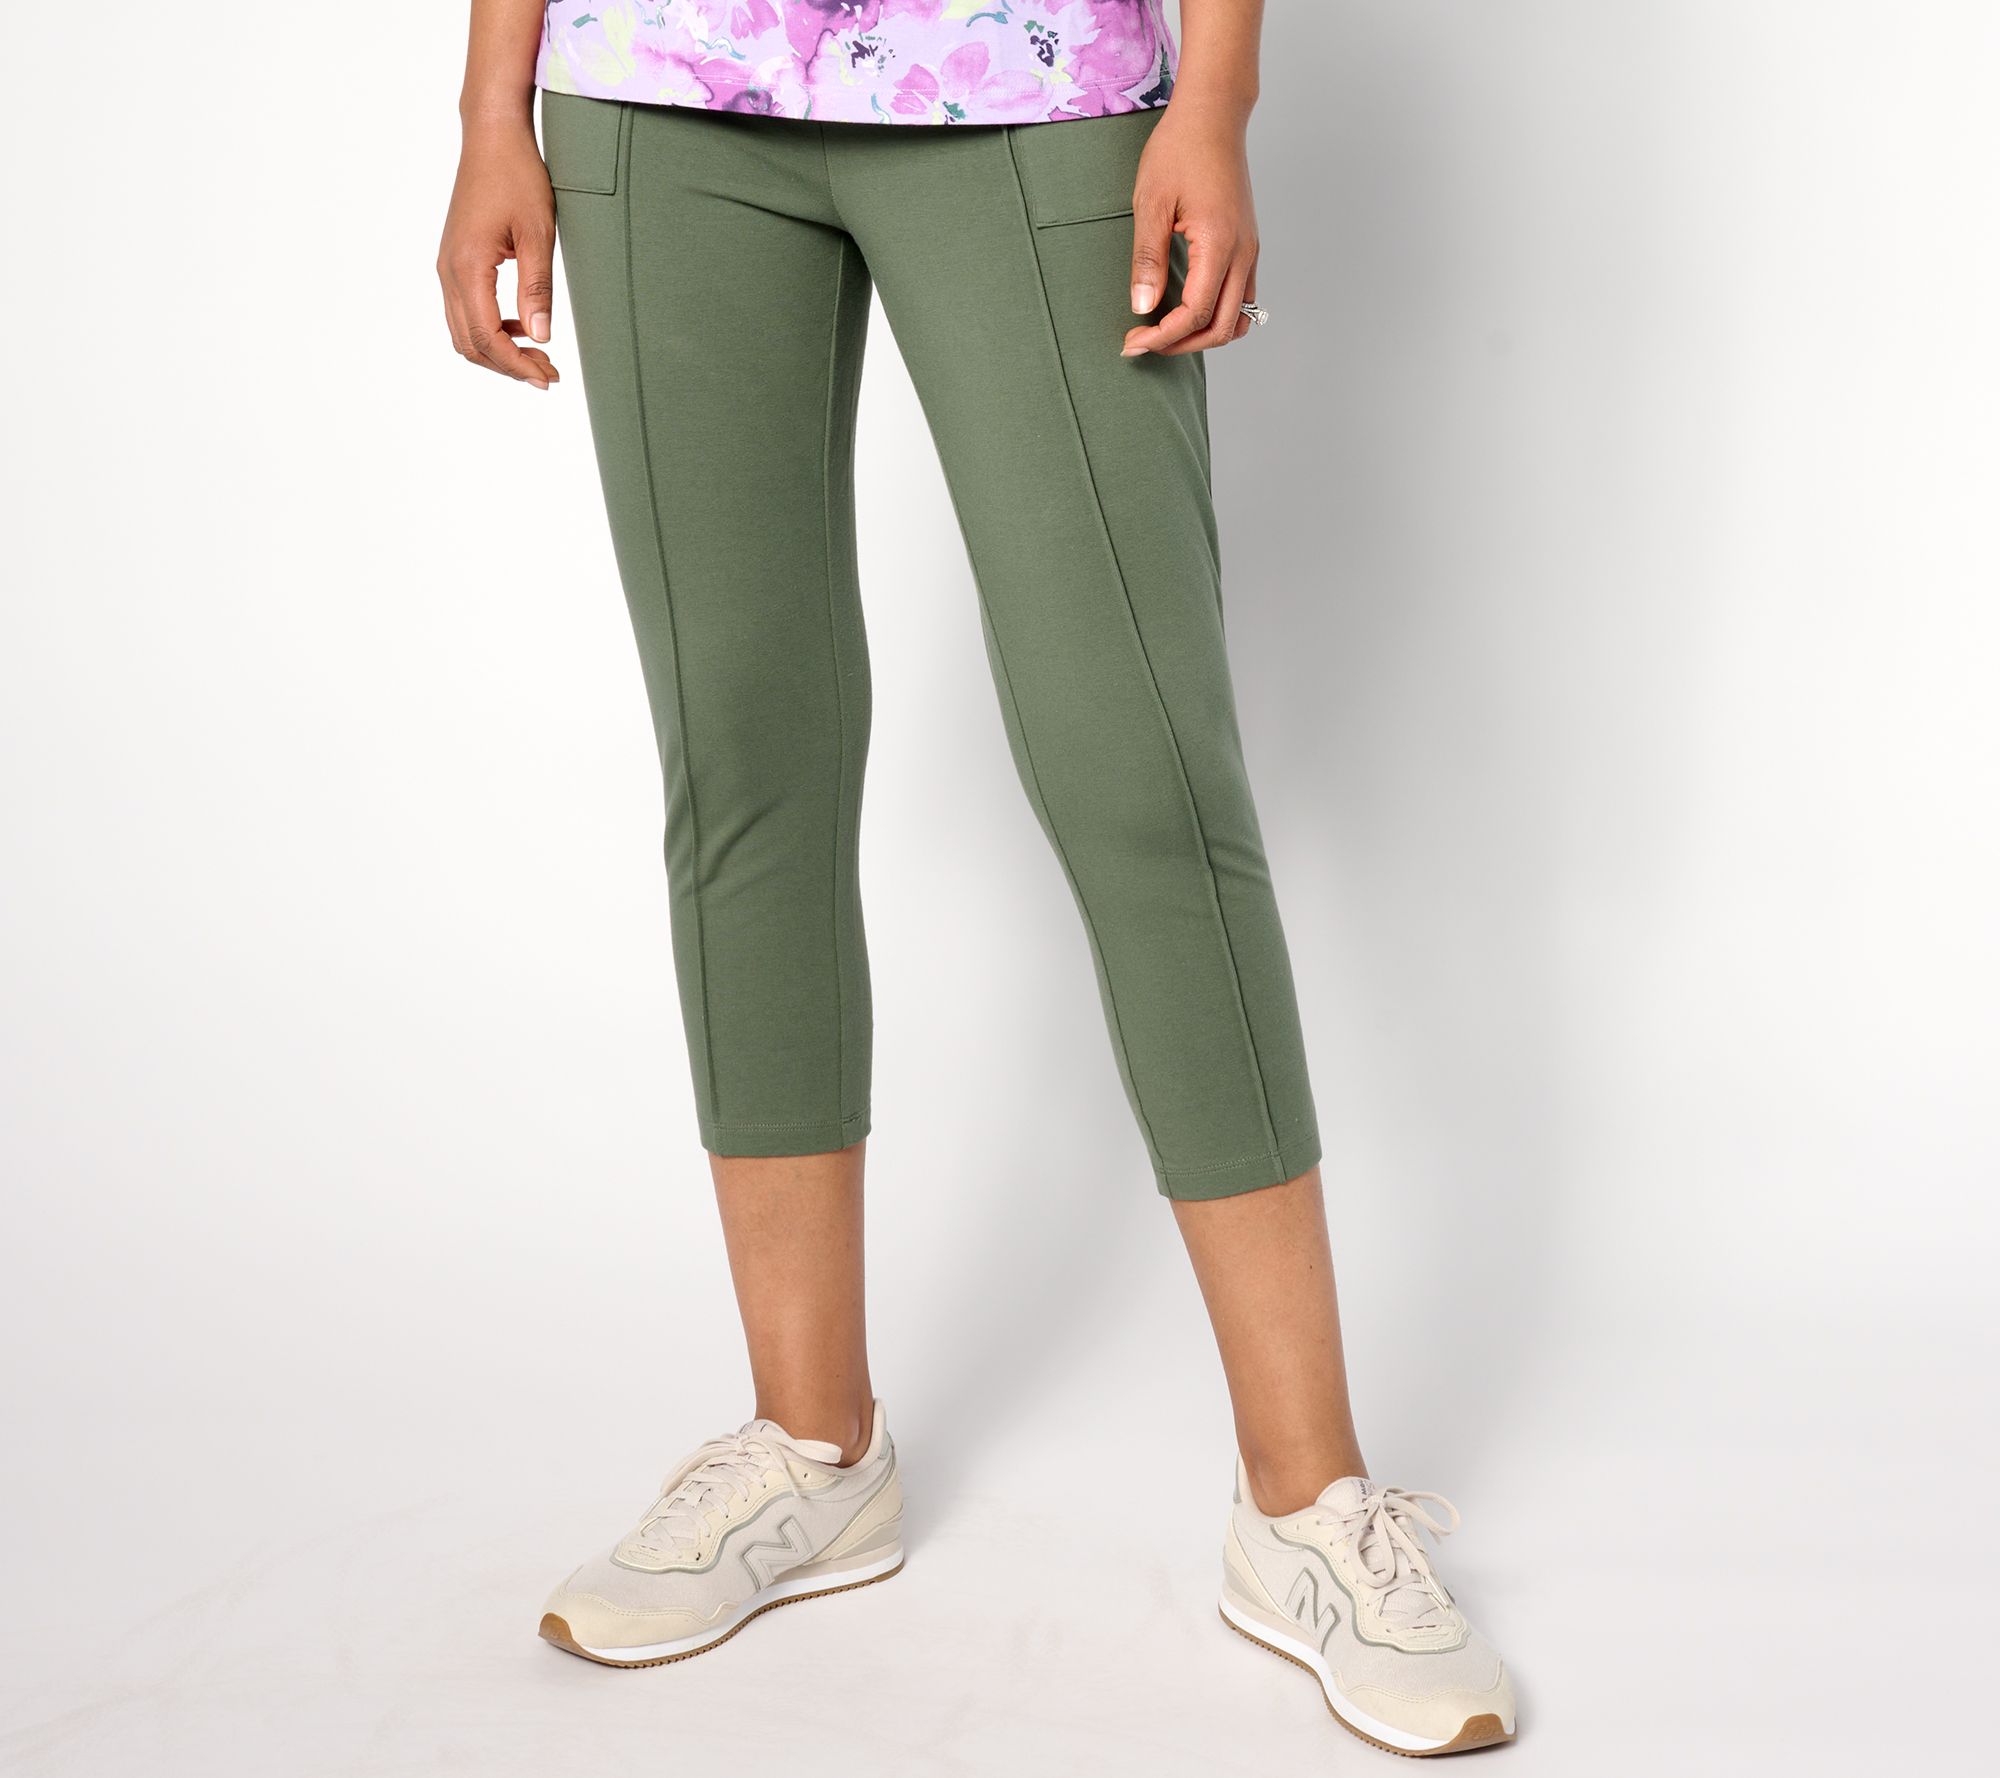 Denim & Co. Active Duo-Stretch Leggings with Back Seam on QVC